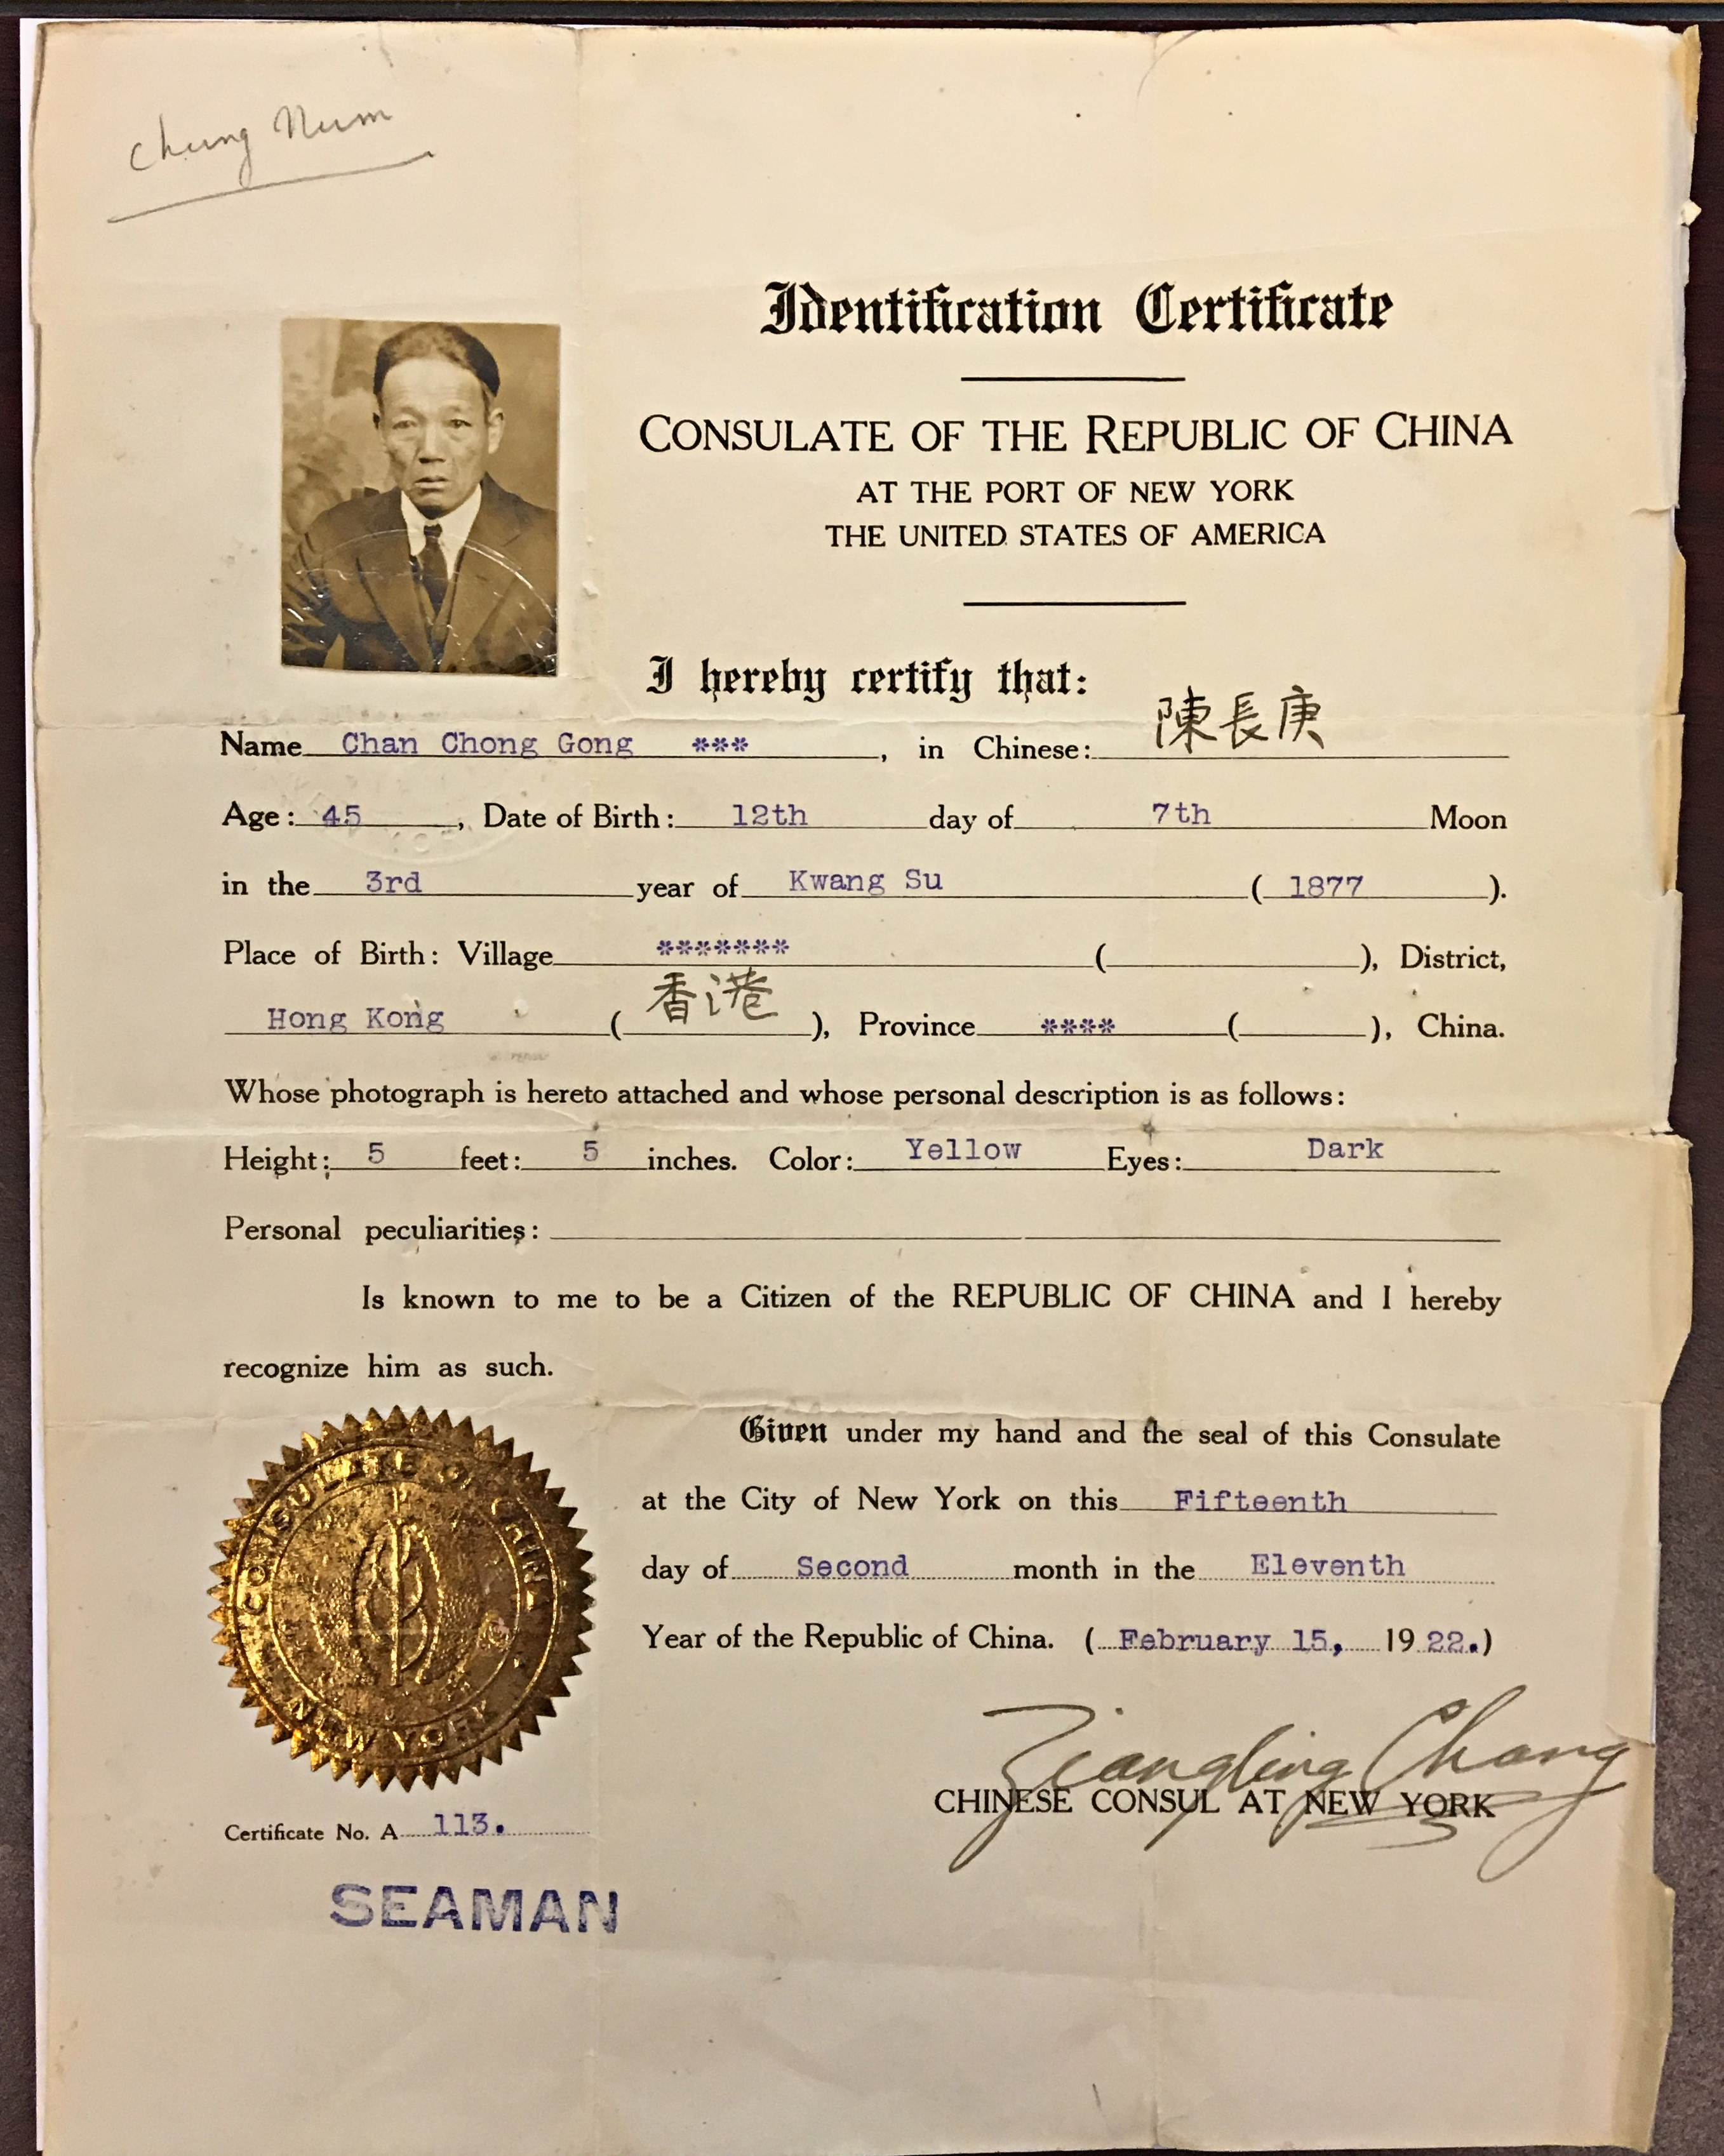 Certificate from the Chinese Consulate of New York, Chan Chong Gong, February 15, 1922.